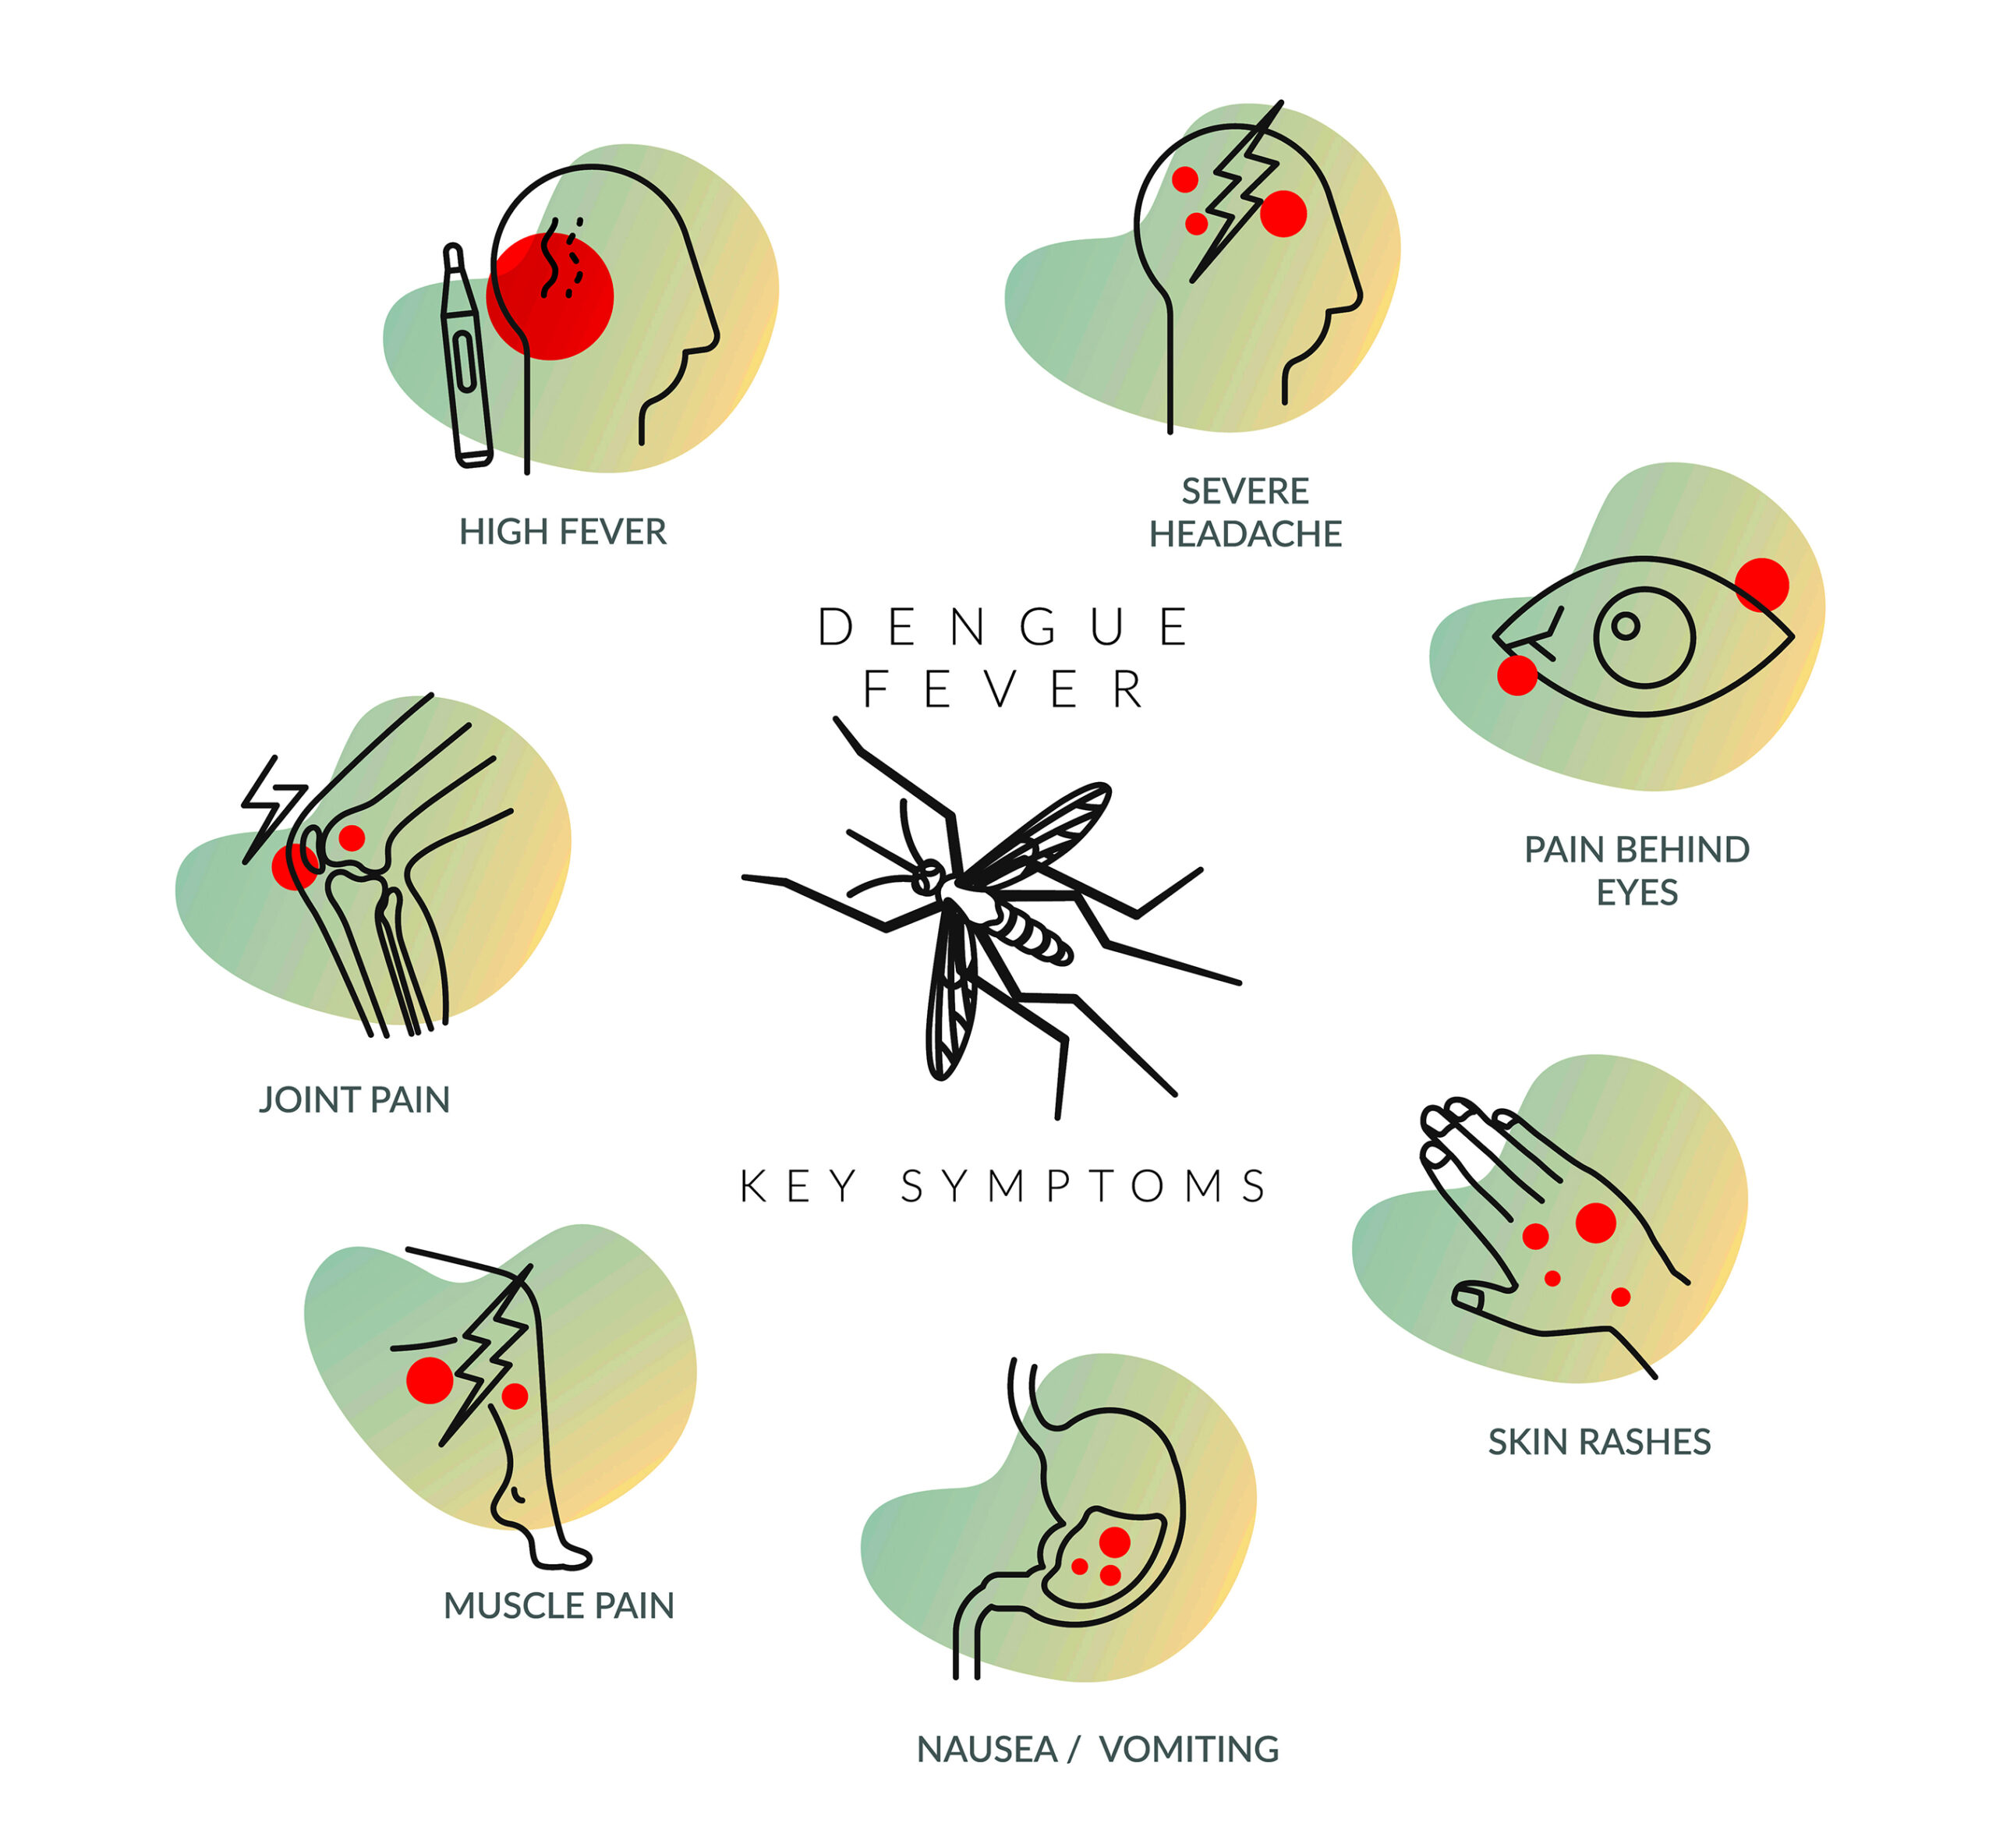 Dengue Fever in the UAE cases rise after weather changes and floods.